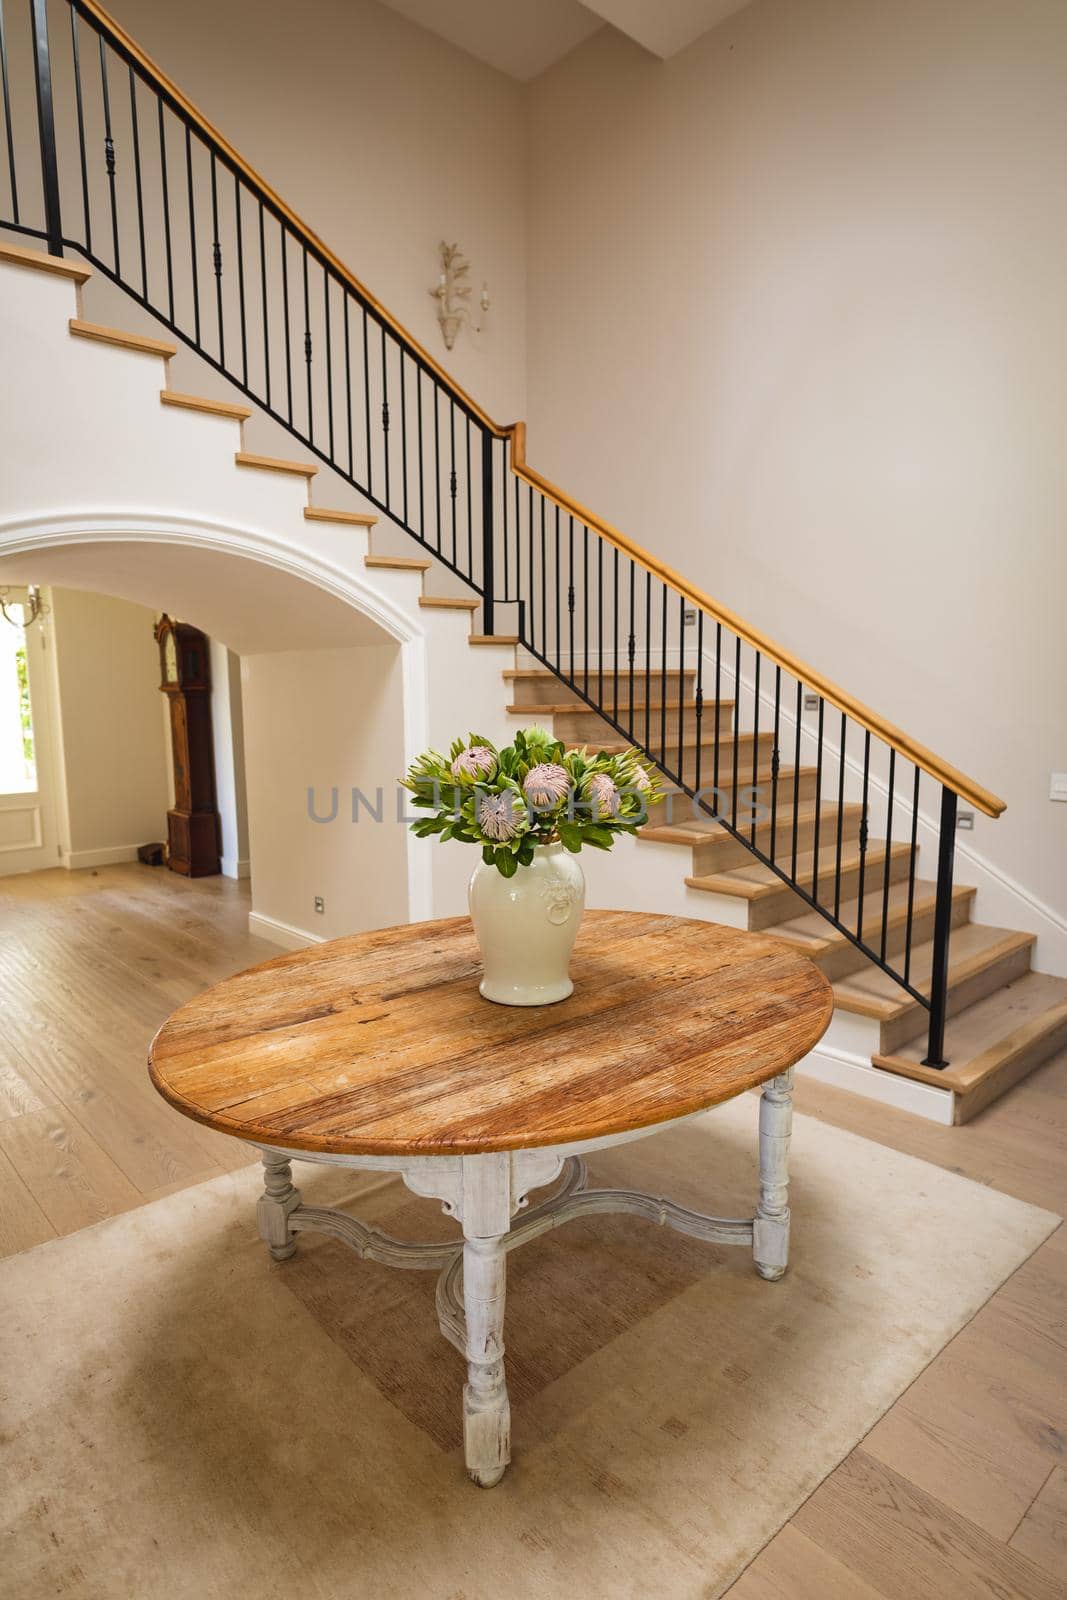 General view of house interior with table and vase with flowers in spacious hallway and staircase by Wavebreakmedia